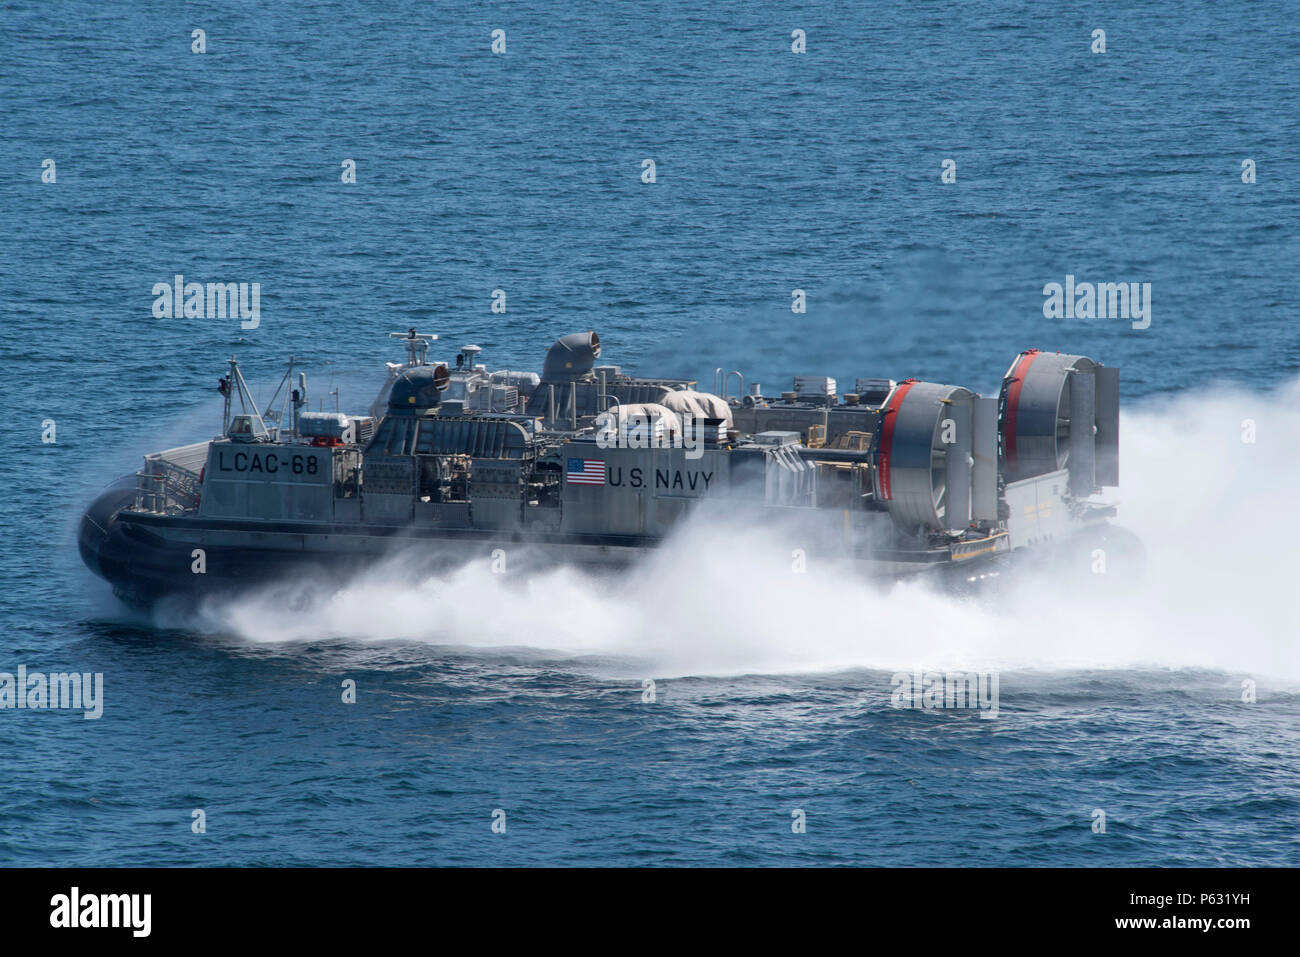 160411-N-VK310-022 ATLANTIC OCEAN (April 11, 2016) An air cushion landing craft  (LCAC) operates with the amphibious assault ship USS Wasp (LHD 1).  Wasp is underway with the Wasp Amphibious Ready Group participating in Amphibious Ready Group/Marine Expeditionary Unit Exercise. (U.S. Navy photo by Mass Communication Specialist Seaman Michael Molina/Released) Stock Photo